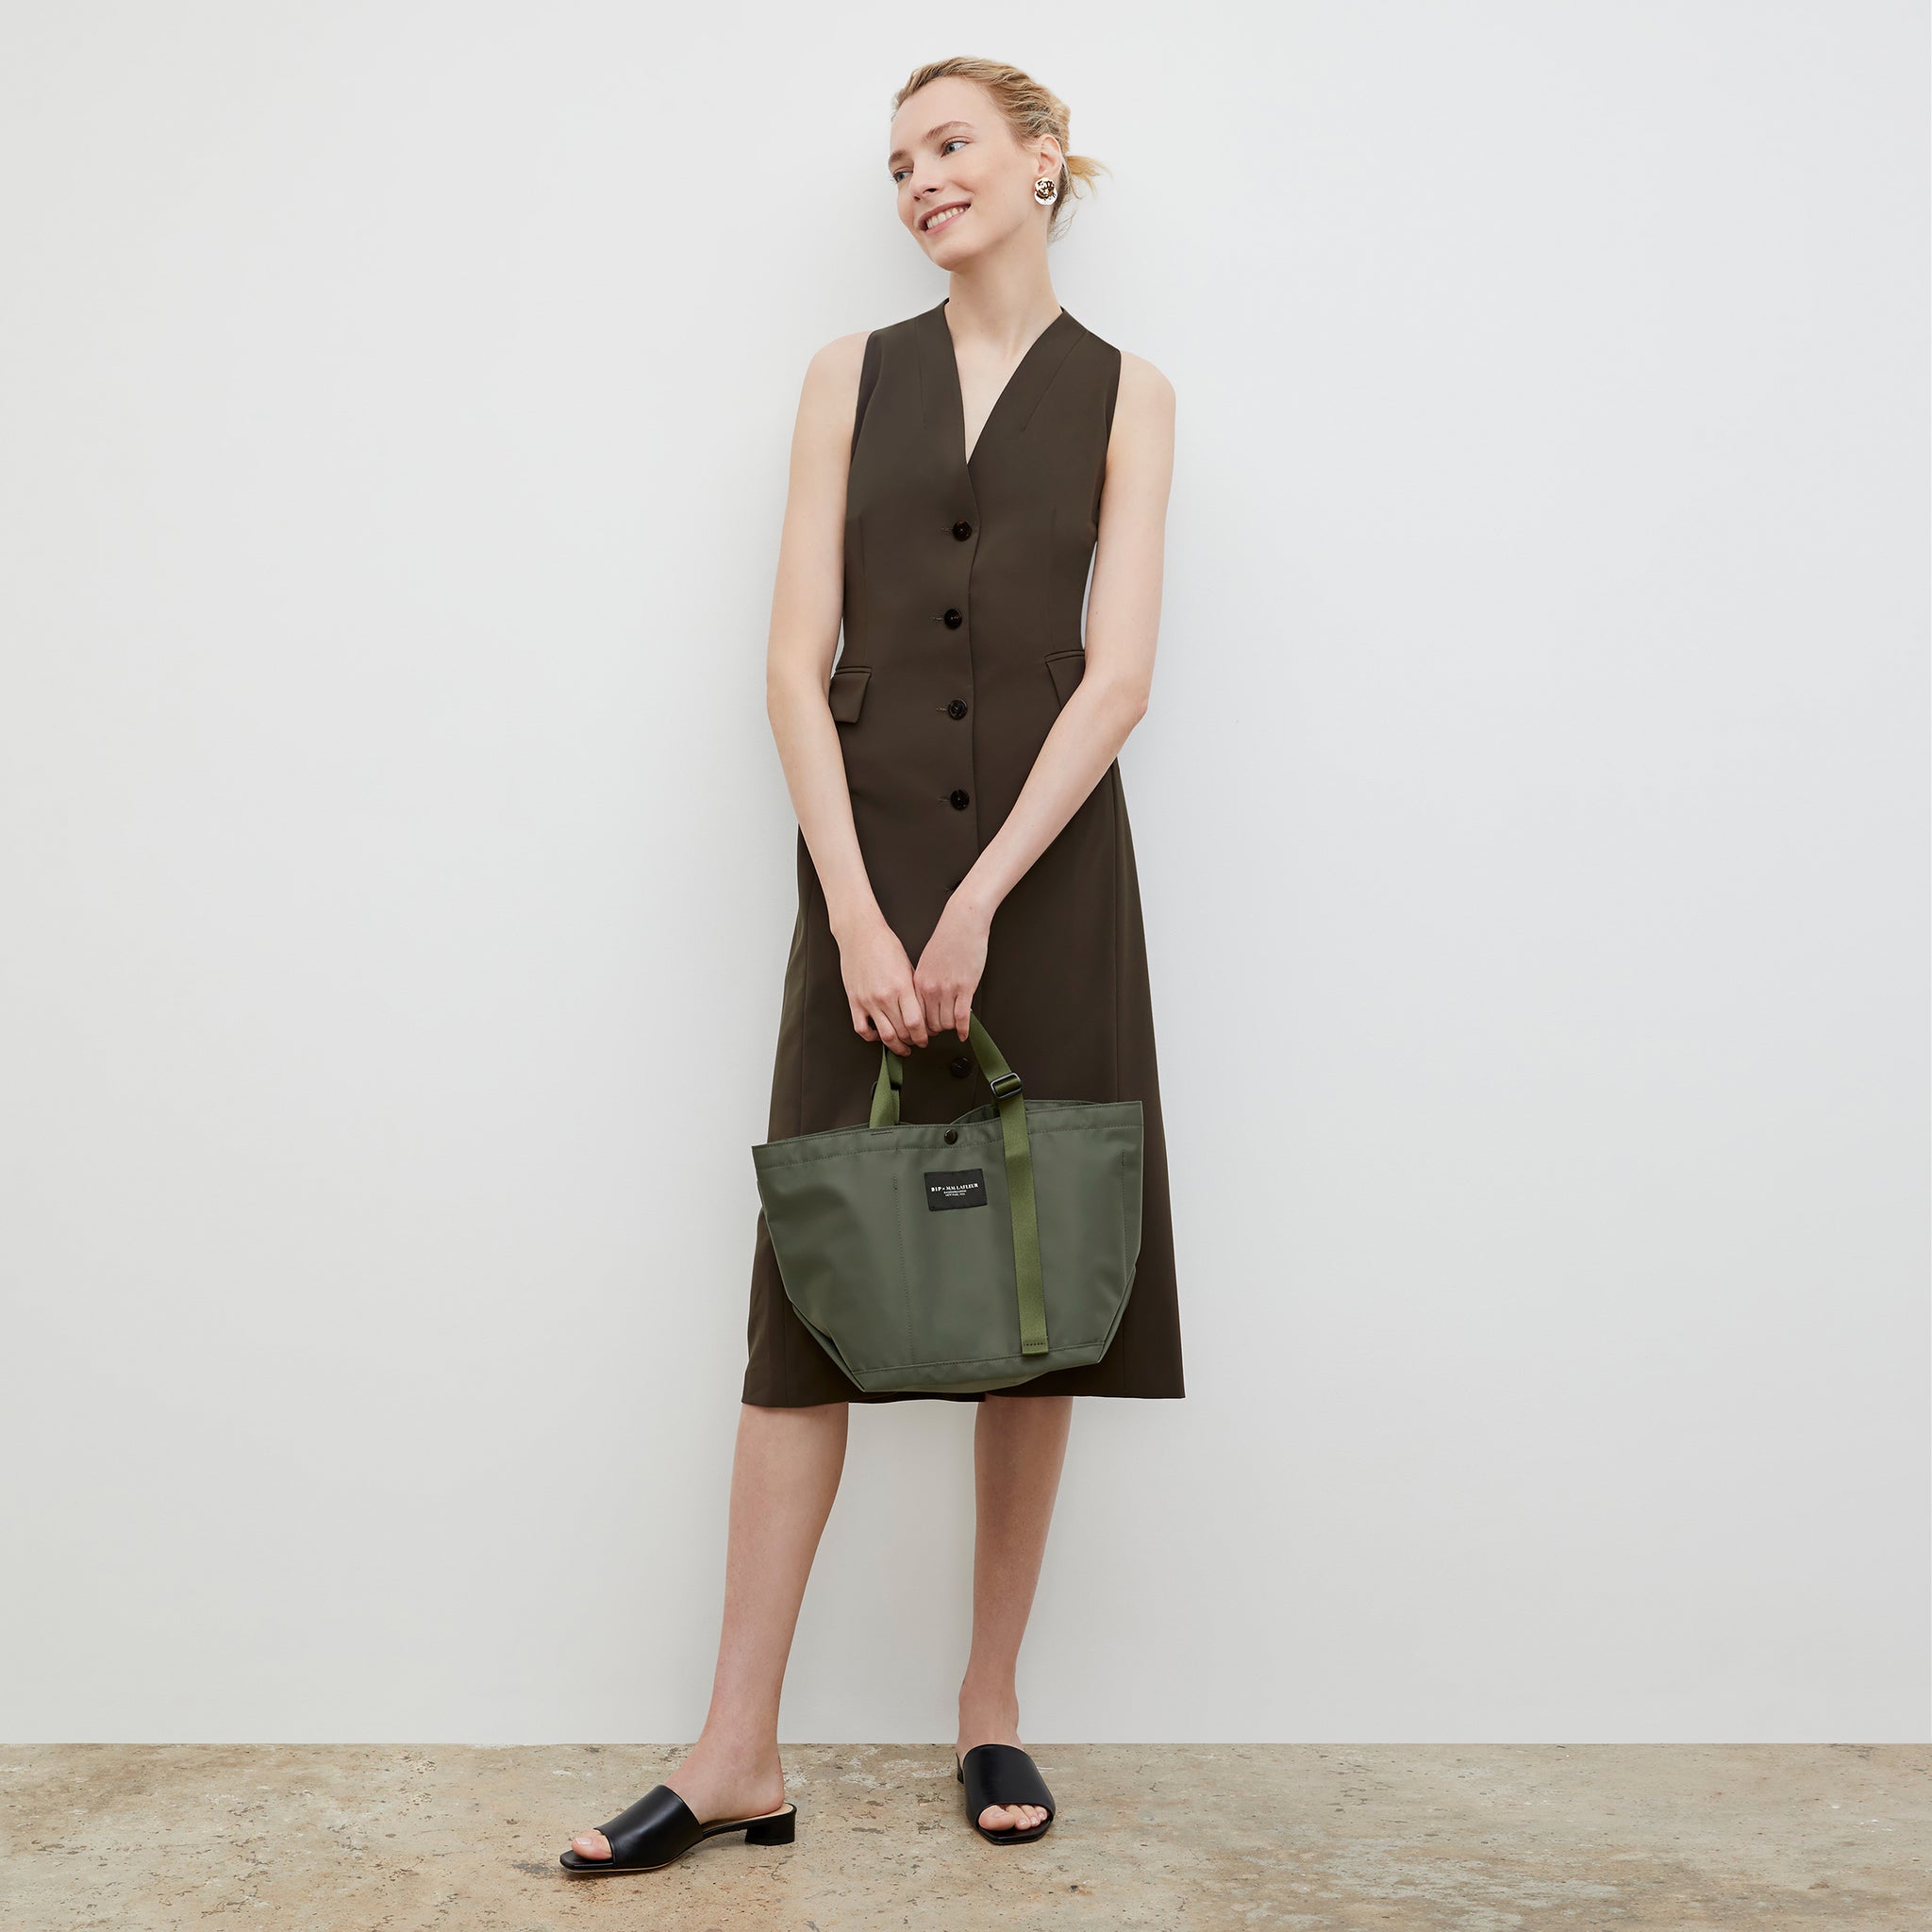 Front image of a woman wearing the Bags in Progress x MM Small Carry All Tote  in Khaki Green